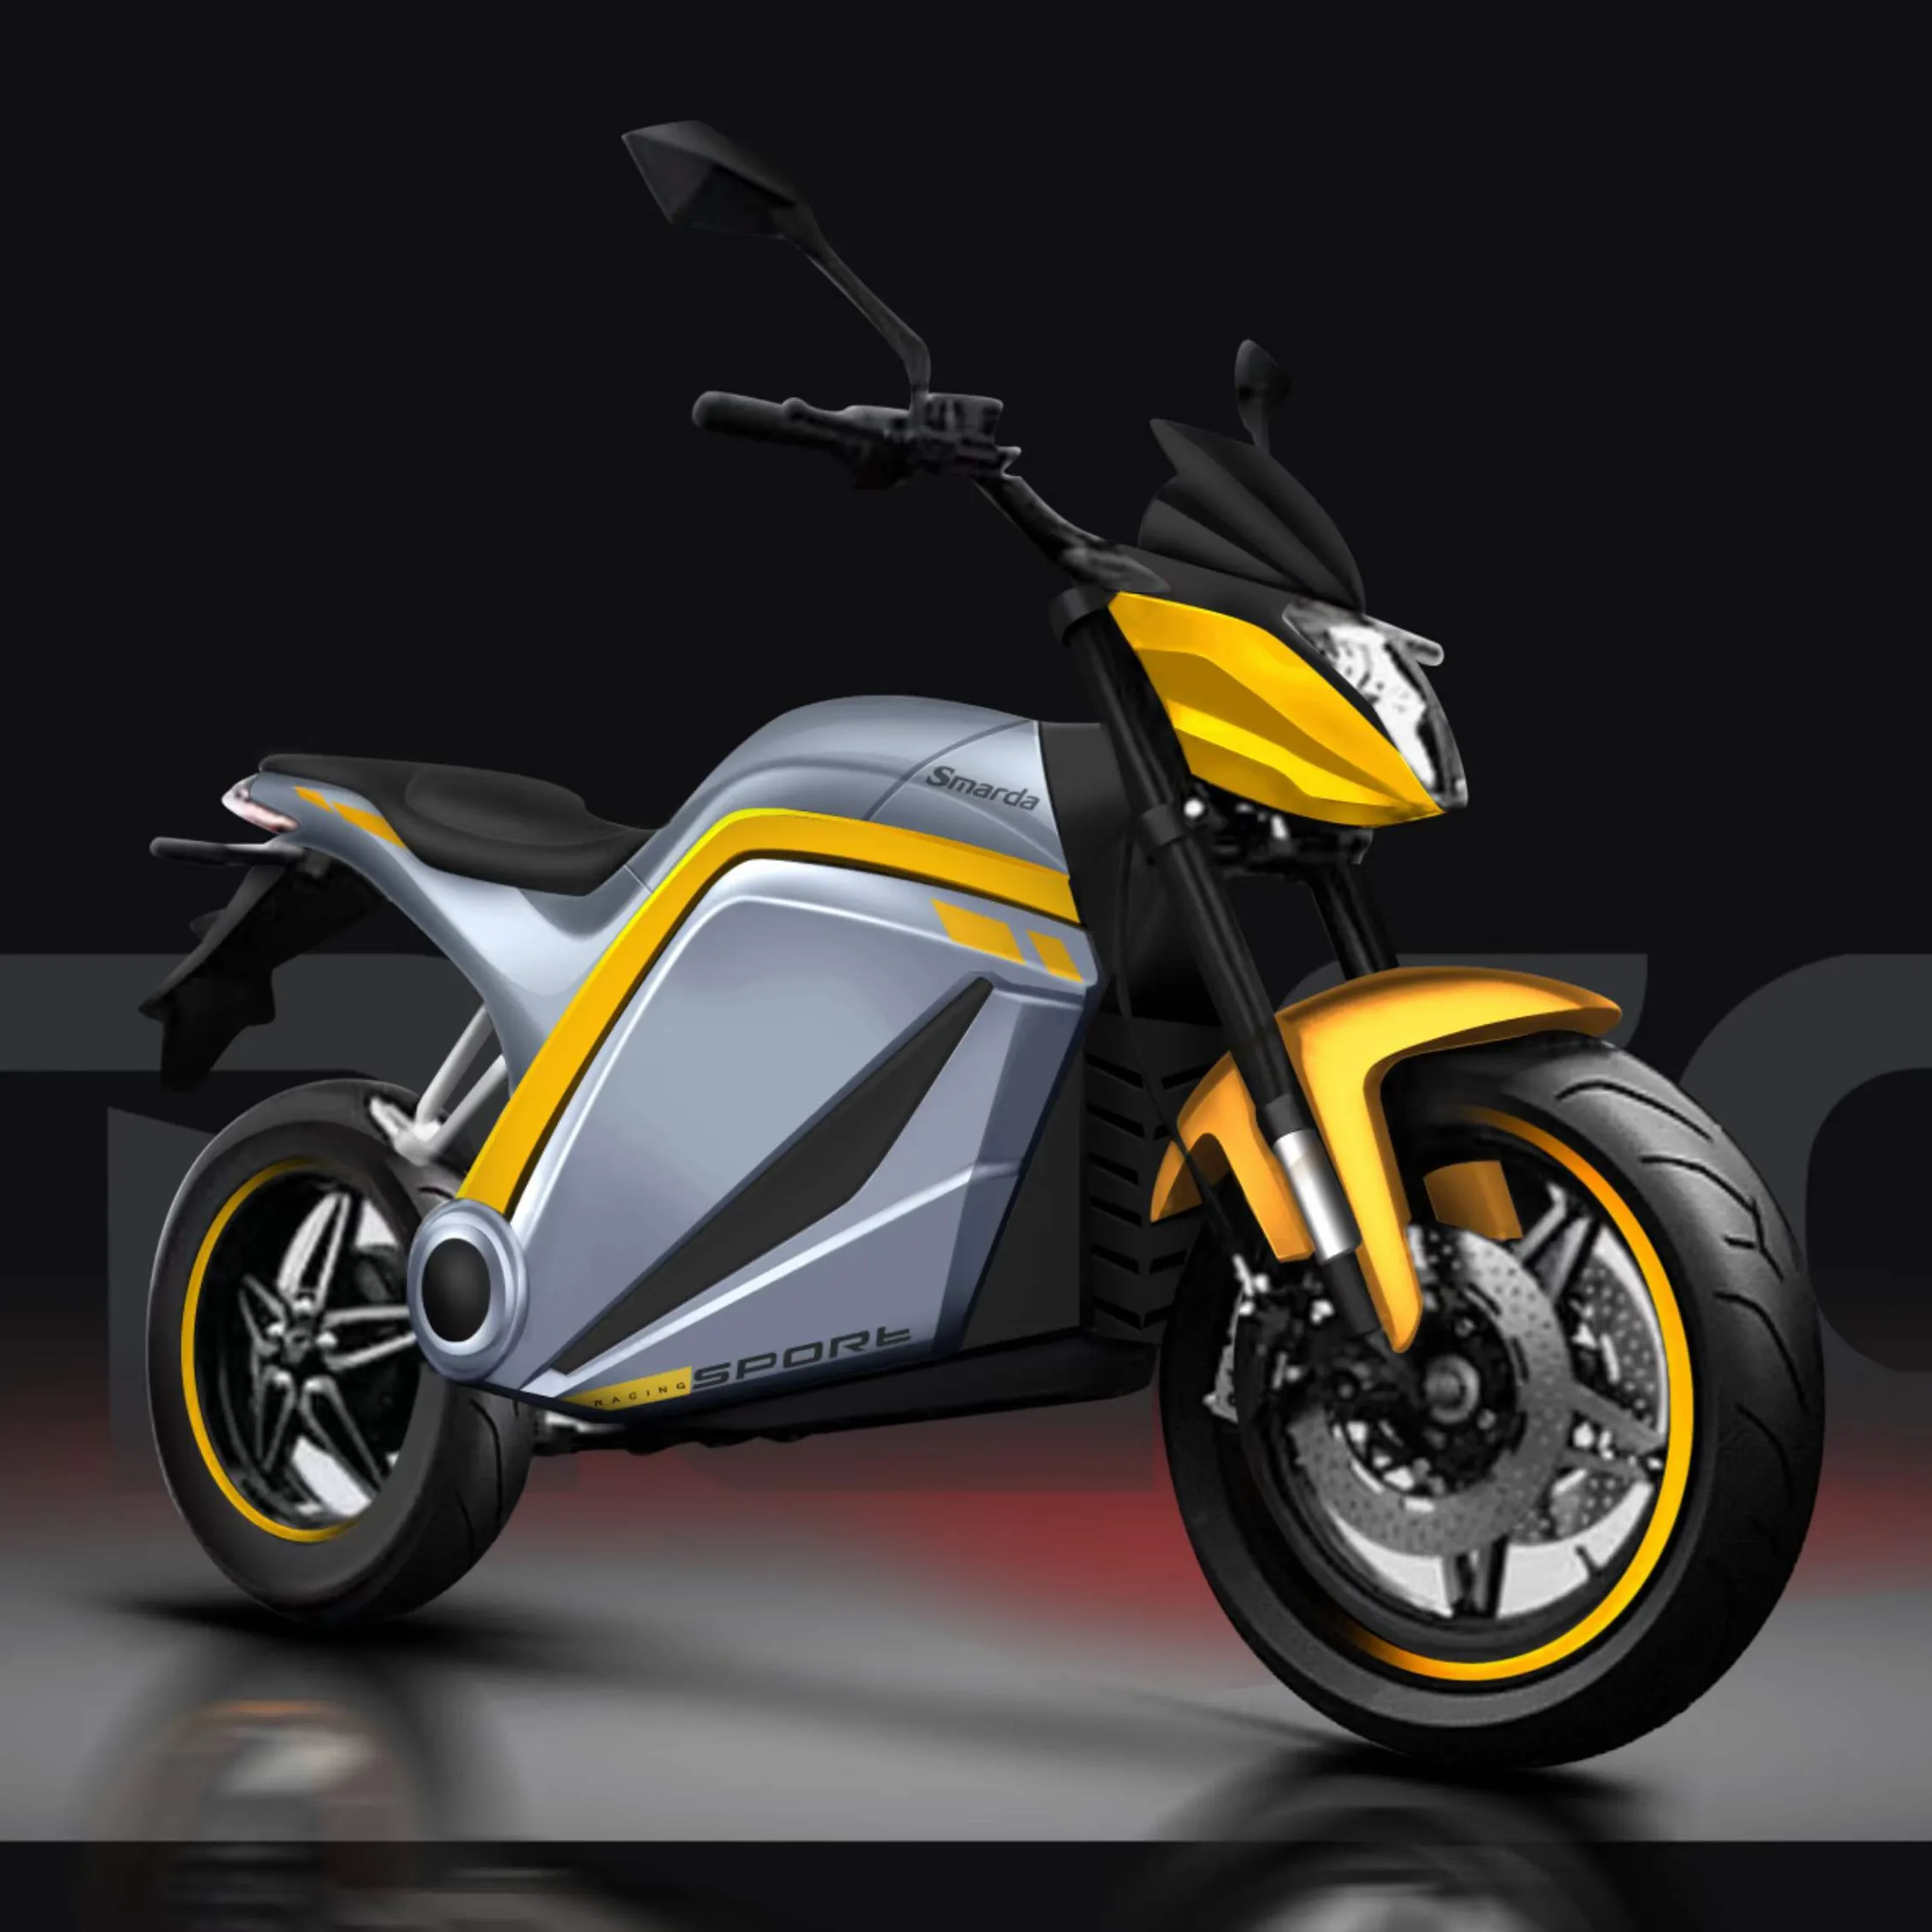 Street legal electric motorcycle crotch rocket emotorcycle scooter retro motorbike